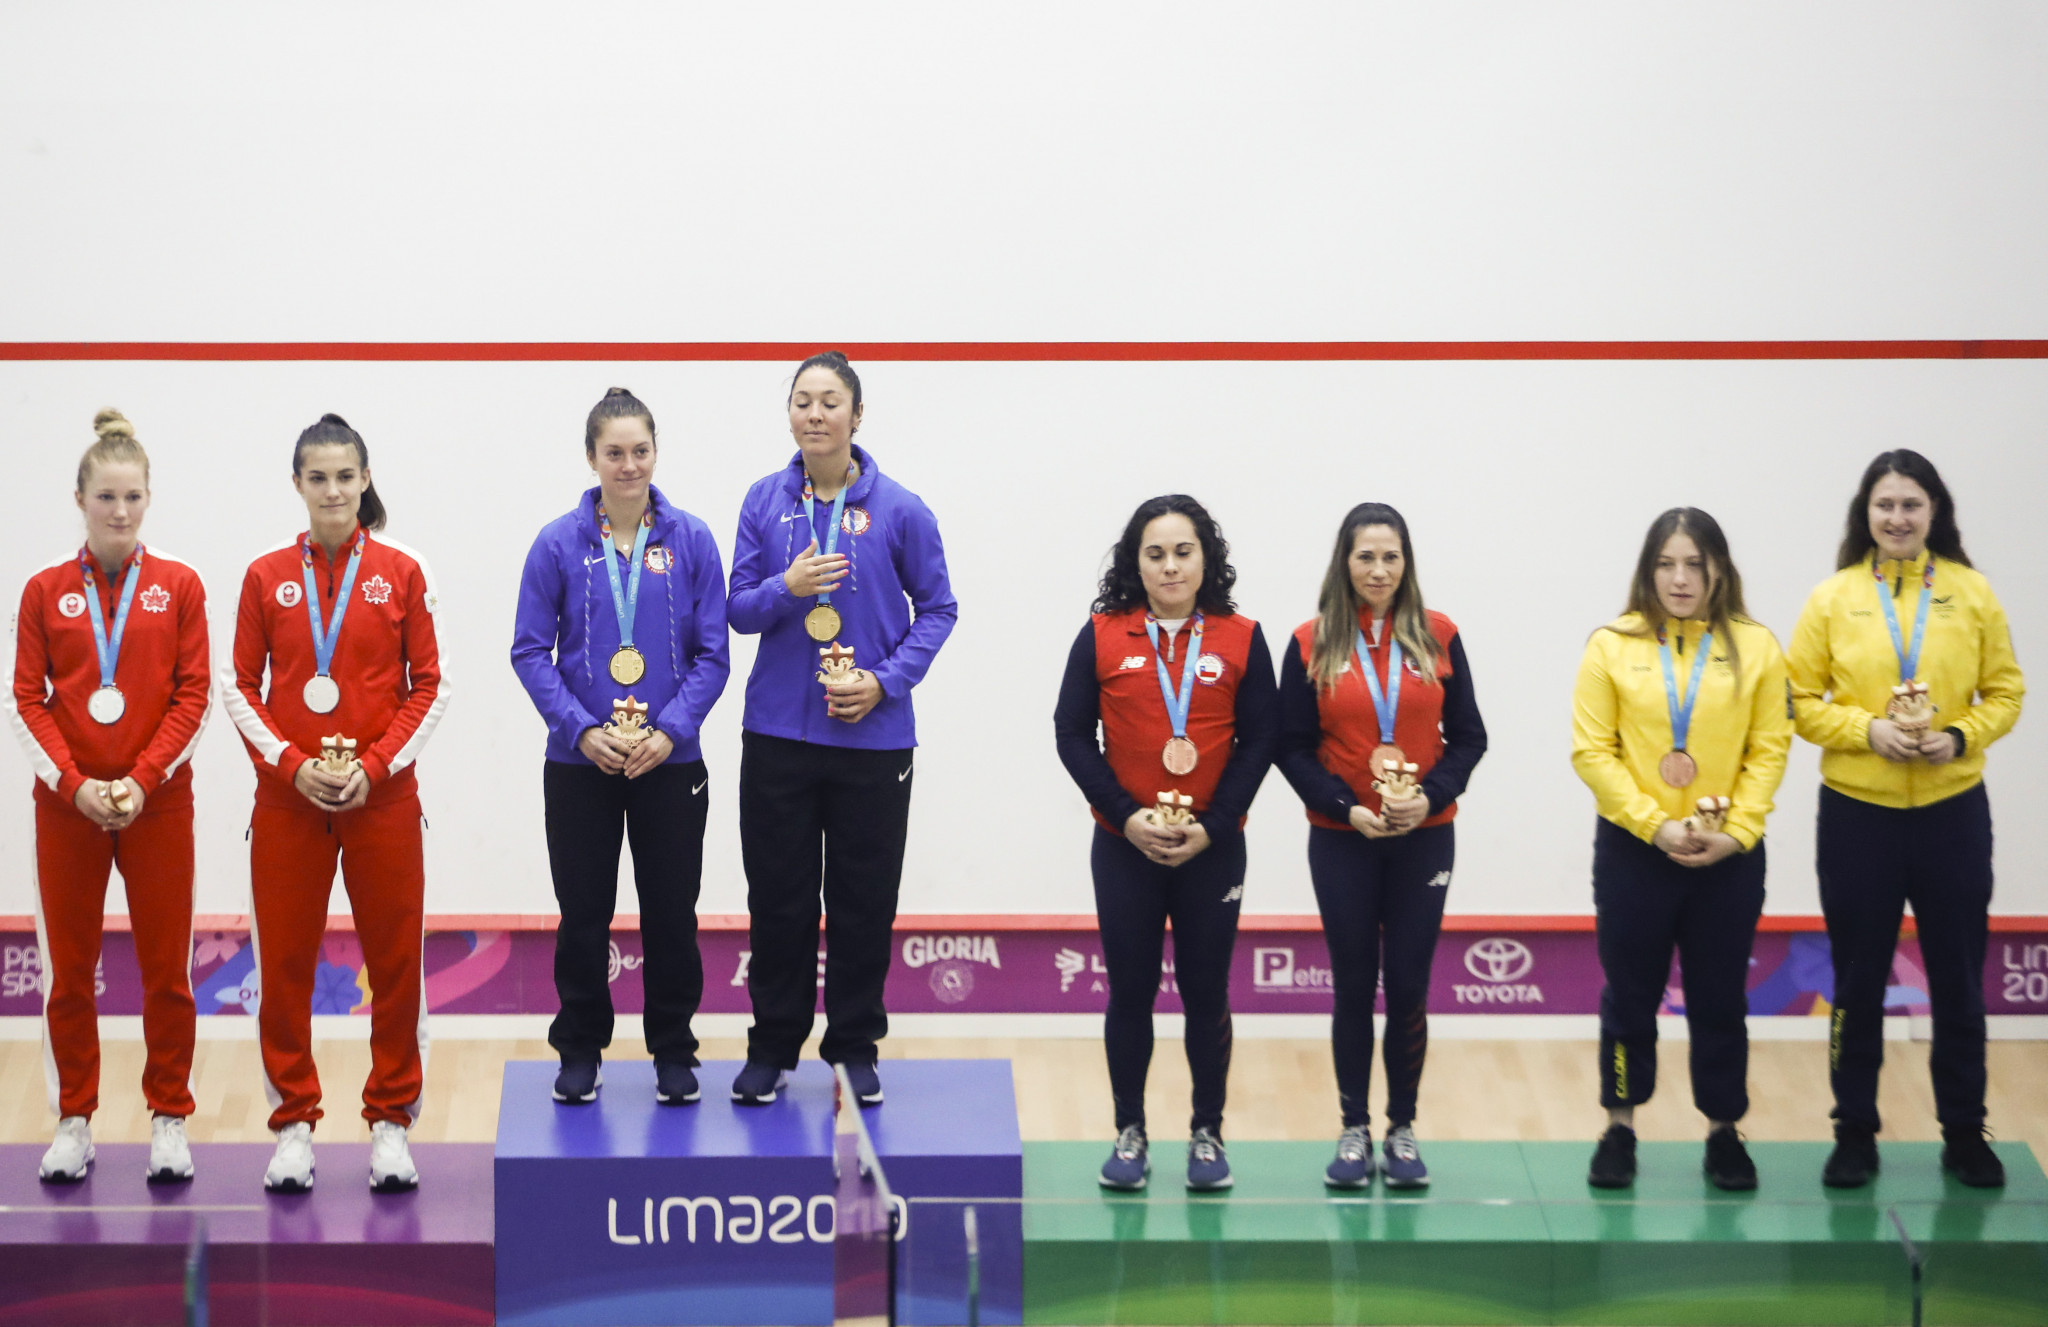 It was a family affair in the women's squash doubles, with Amanda and Sabrina Sobhy of the United States winning gold and Colombia's Laura and Maria Tovar Perez receiving bronze ©Lima 2019 